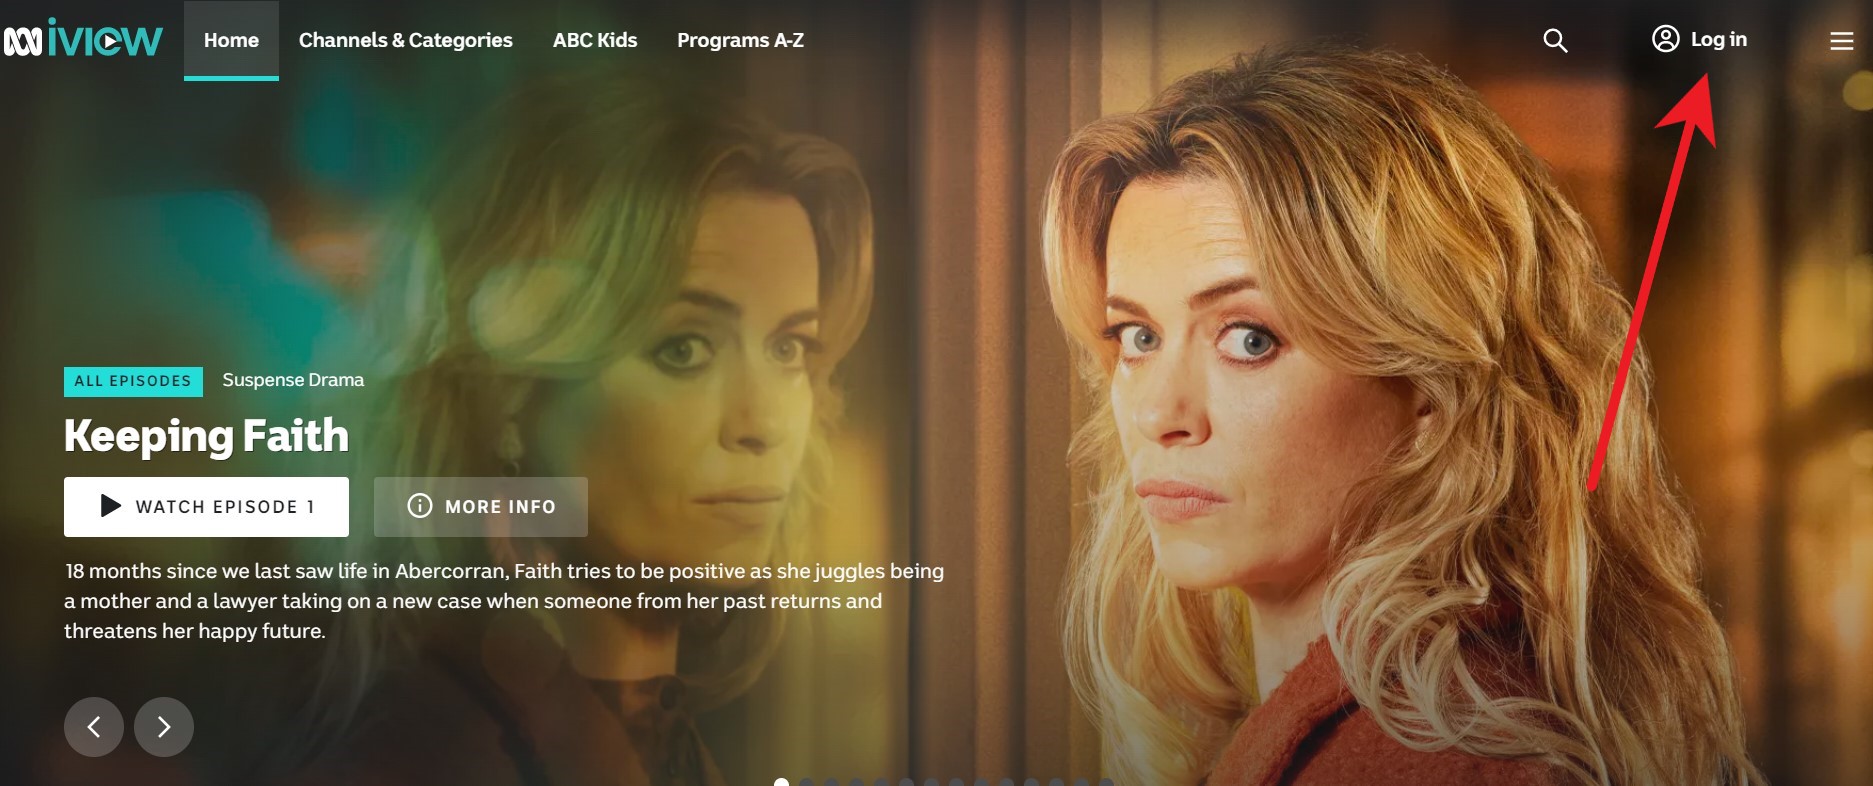 click-abc-iview-log-in-USA